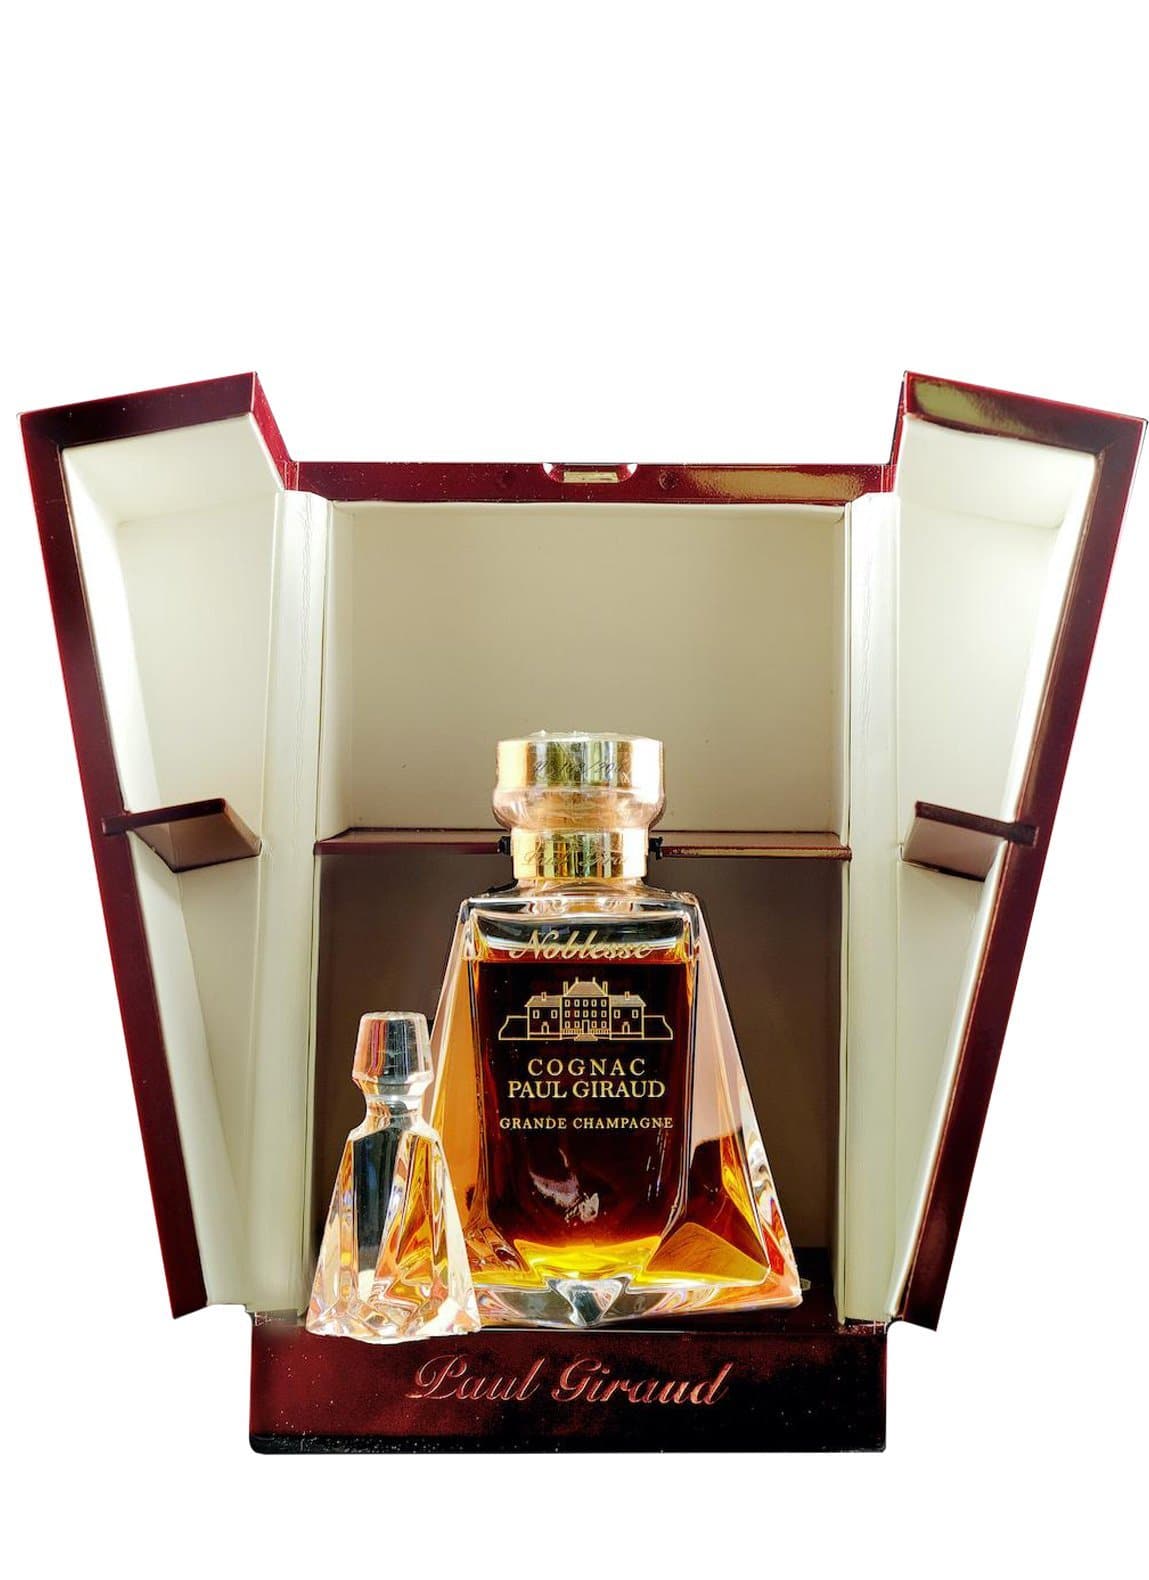 Paul Giraud Noblesse Grand Champagne Cognac 40% 500ml | Brandy | Shop online at Spirits of France